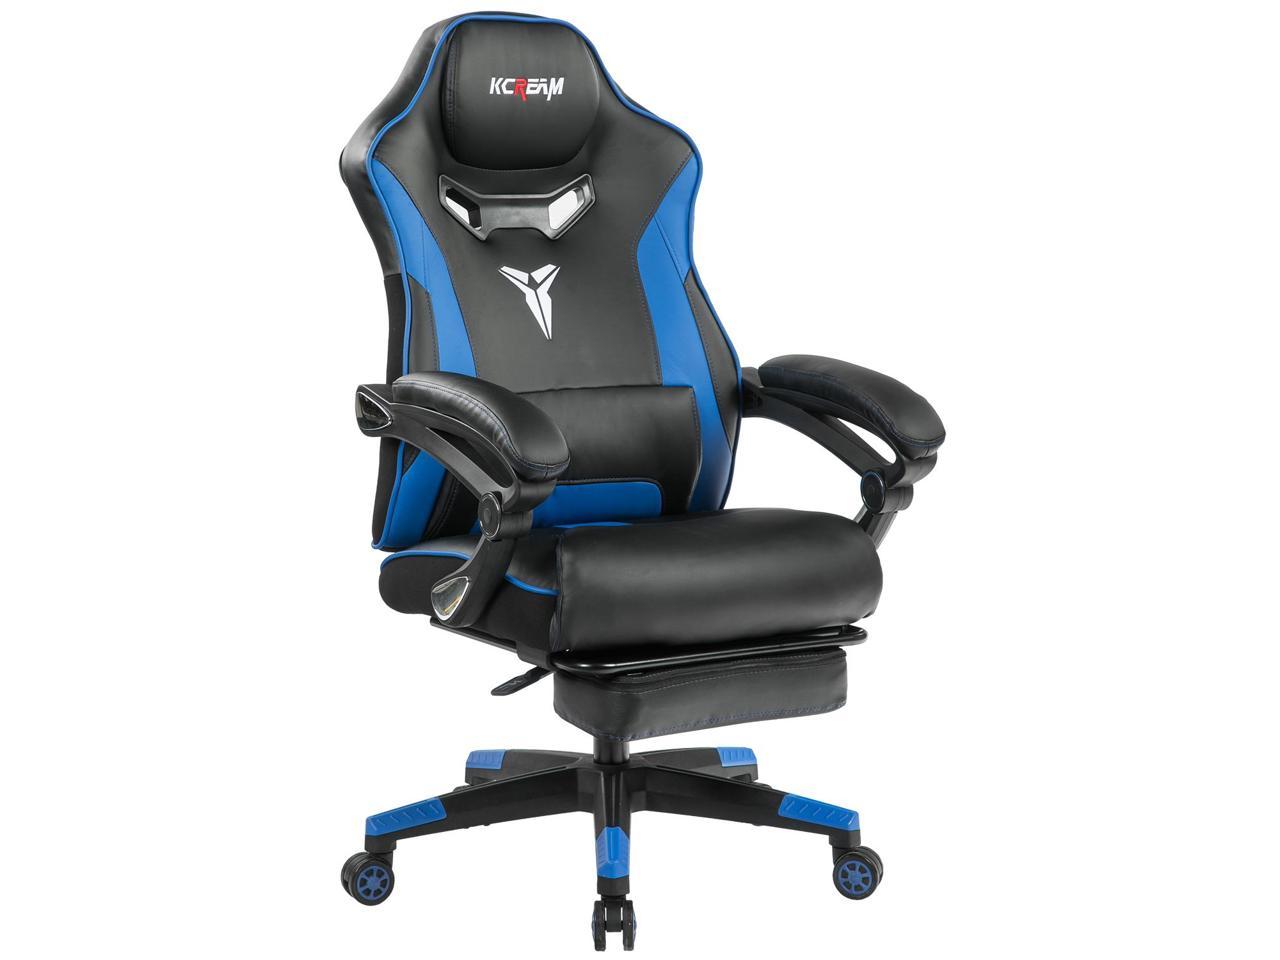 MIRacing Gaming Chair Reclining Memory Foam Racing Computer Chair Ergonomic High-Back Desk Office Chair with Headrest and Lumbar Support Blue